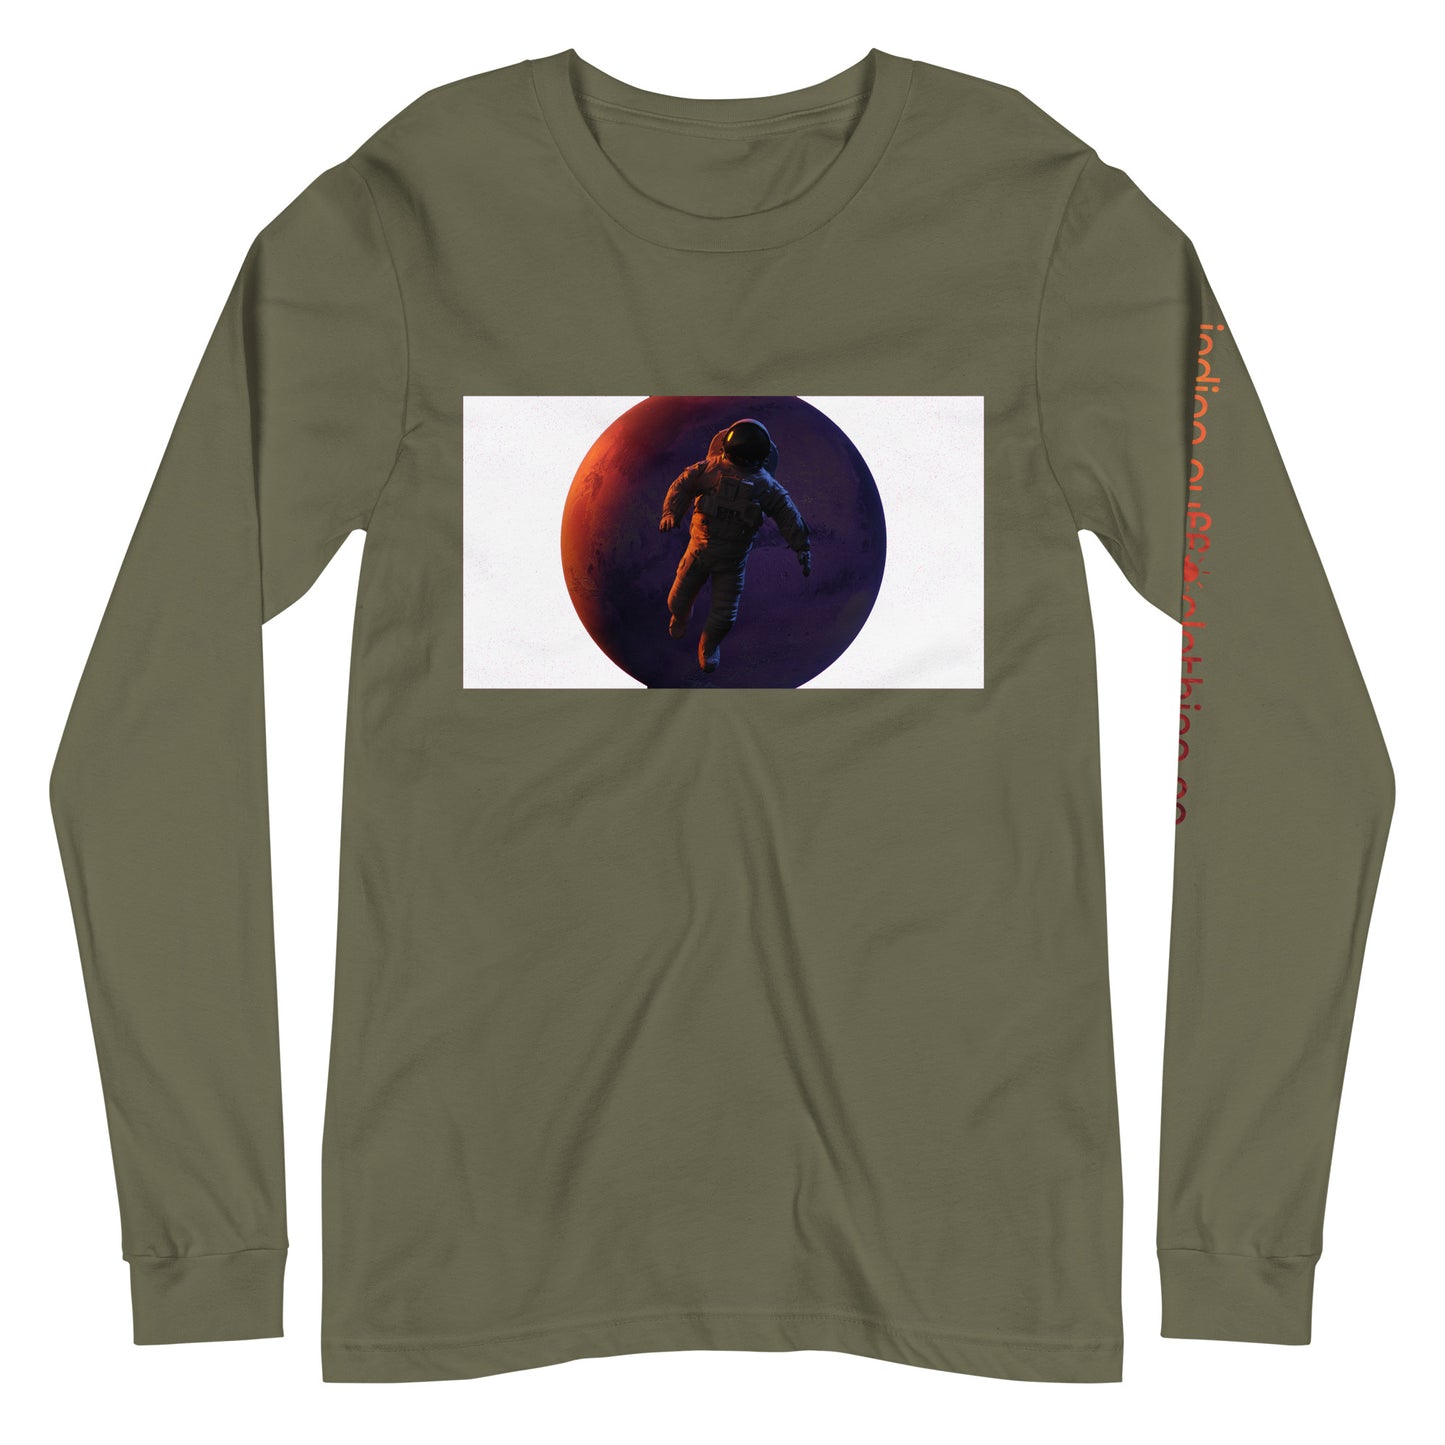 Spaced Out Long Sleeve Tee (black)